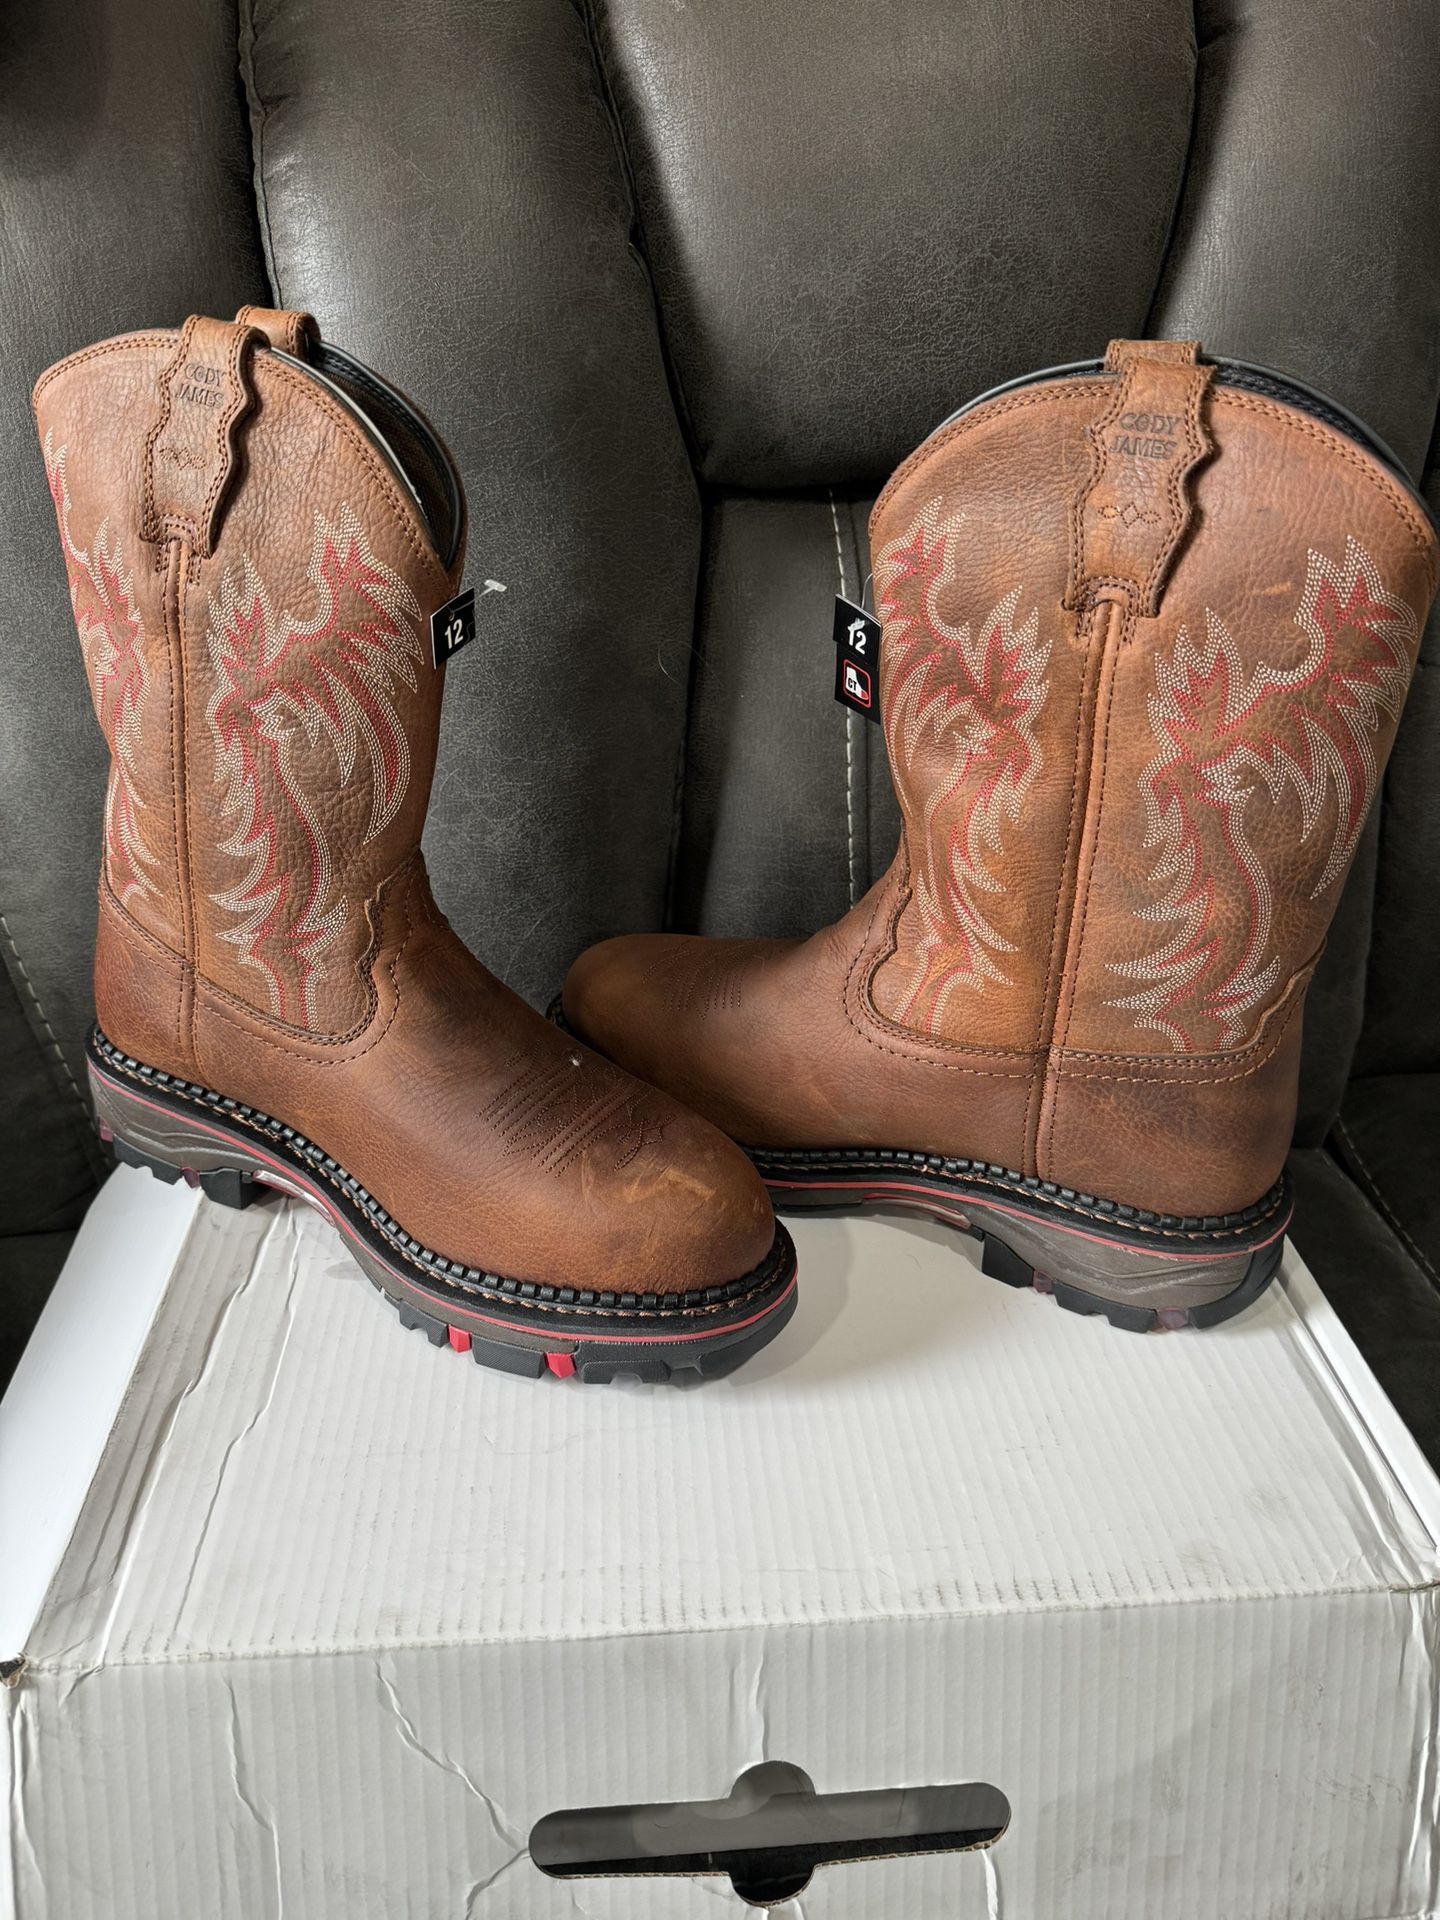 Cody James Western Boots